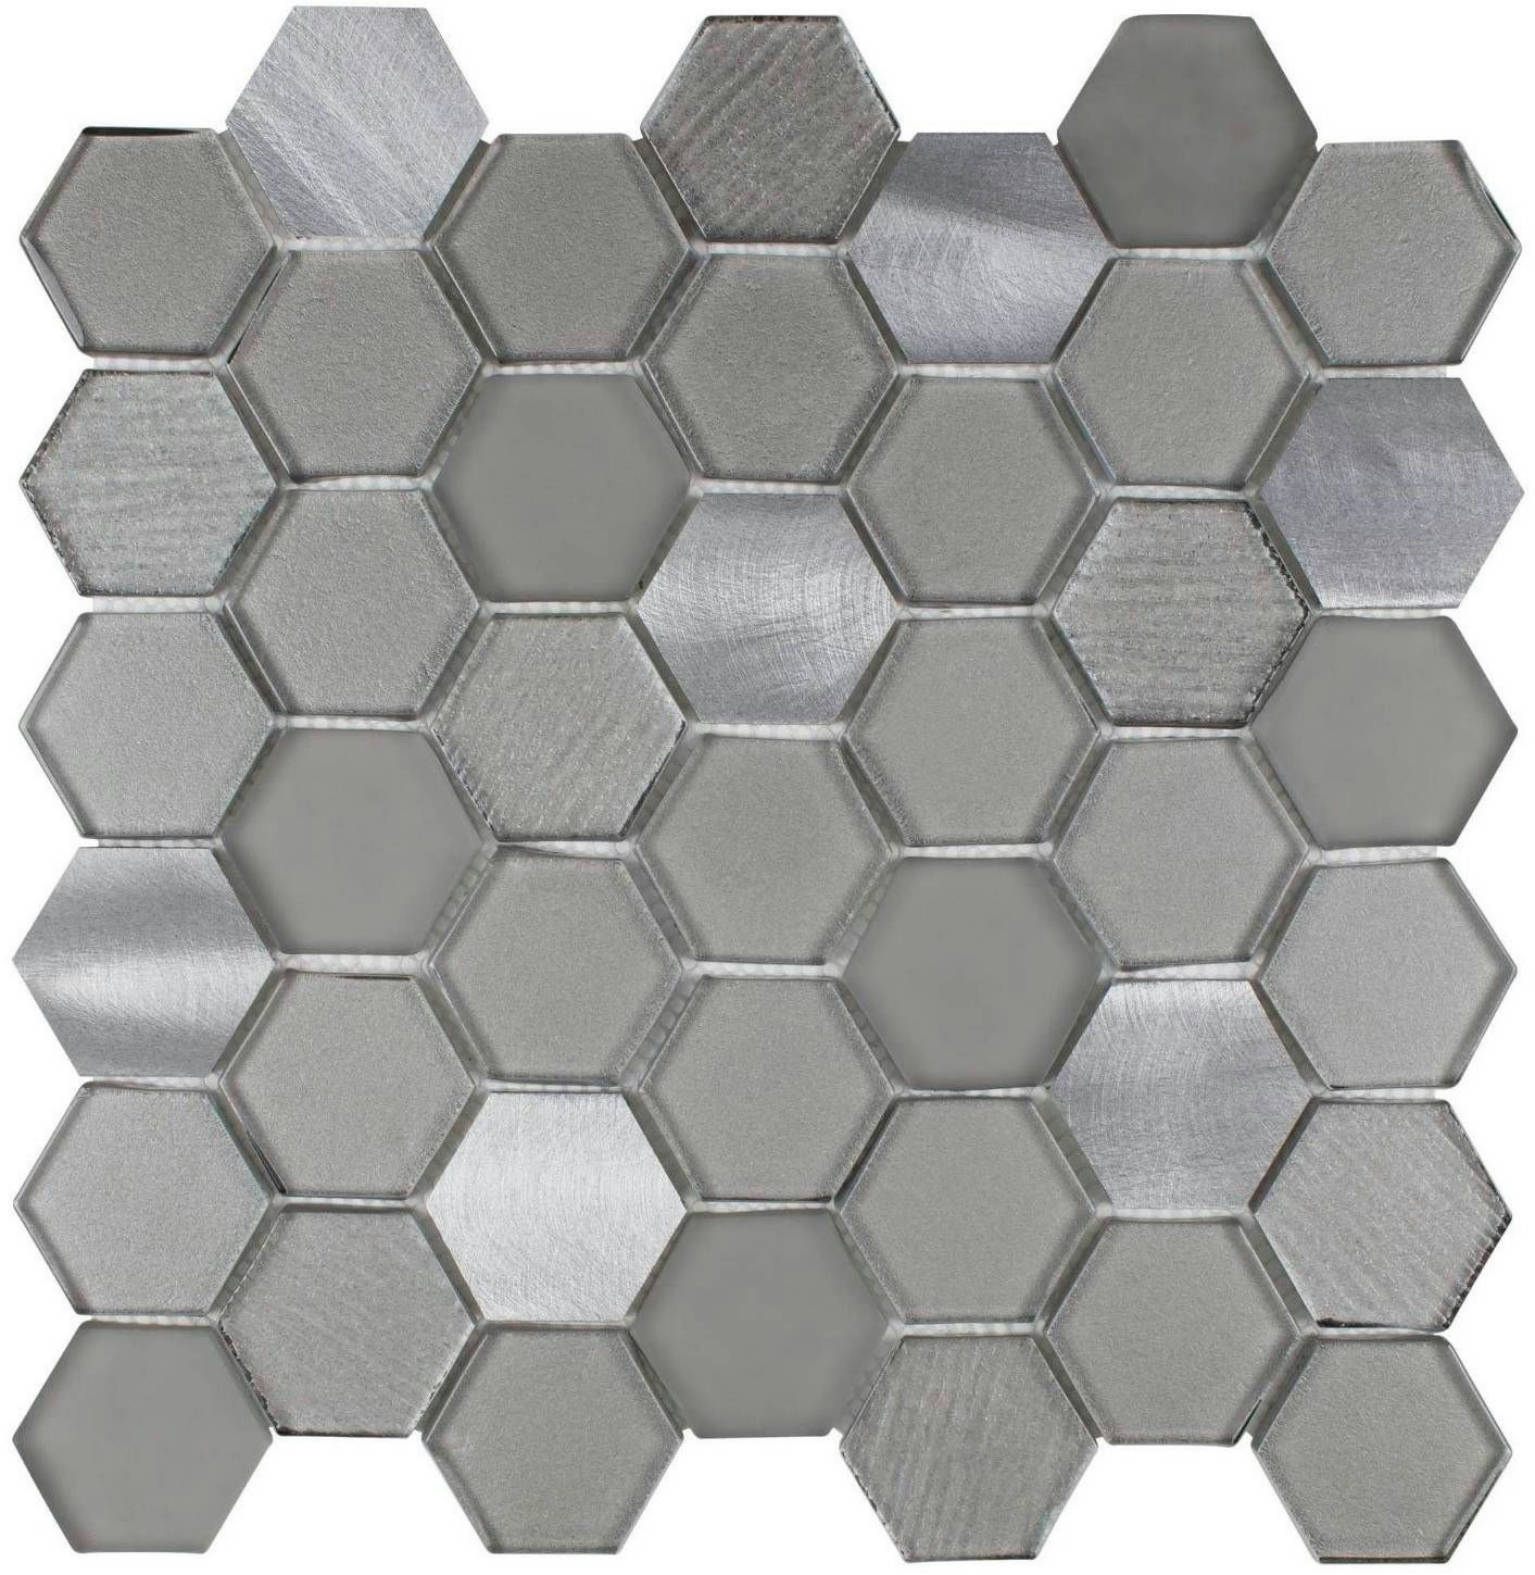 HX-197 | Stones & More | Finest selection of Mosaics, Glass, Tile and Stone